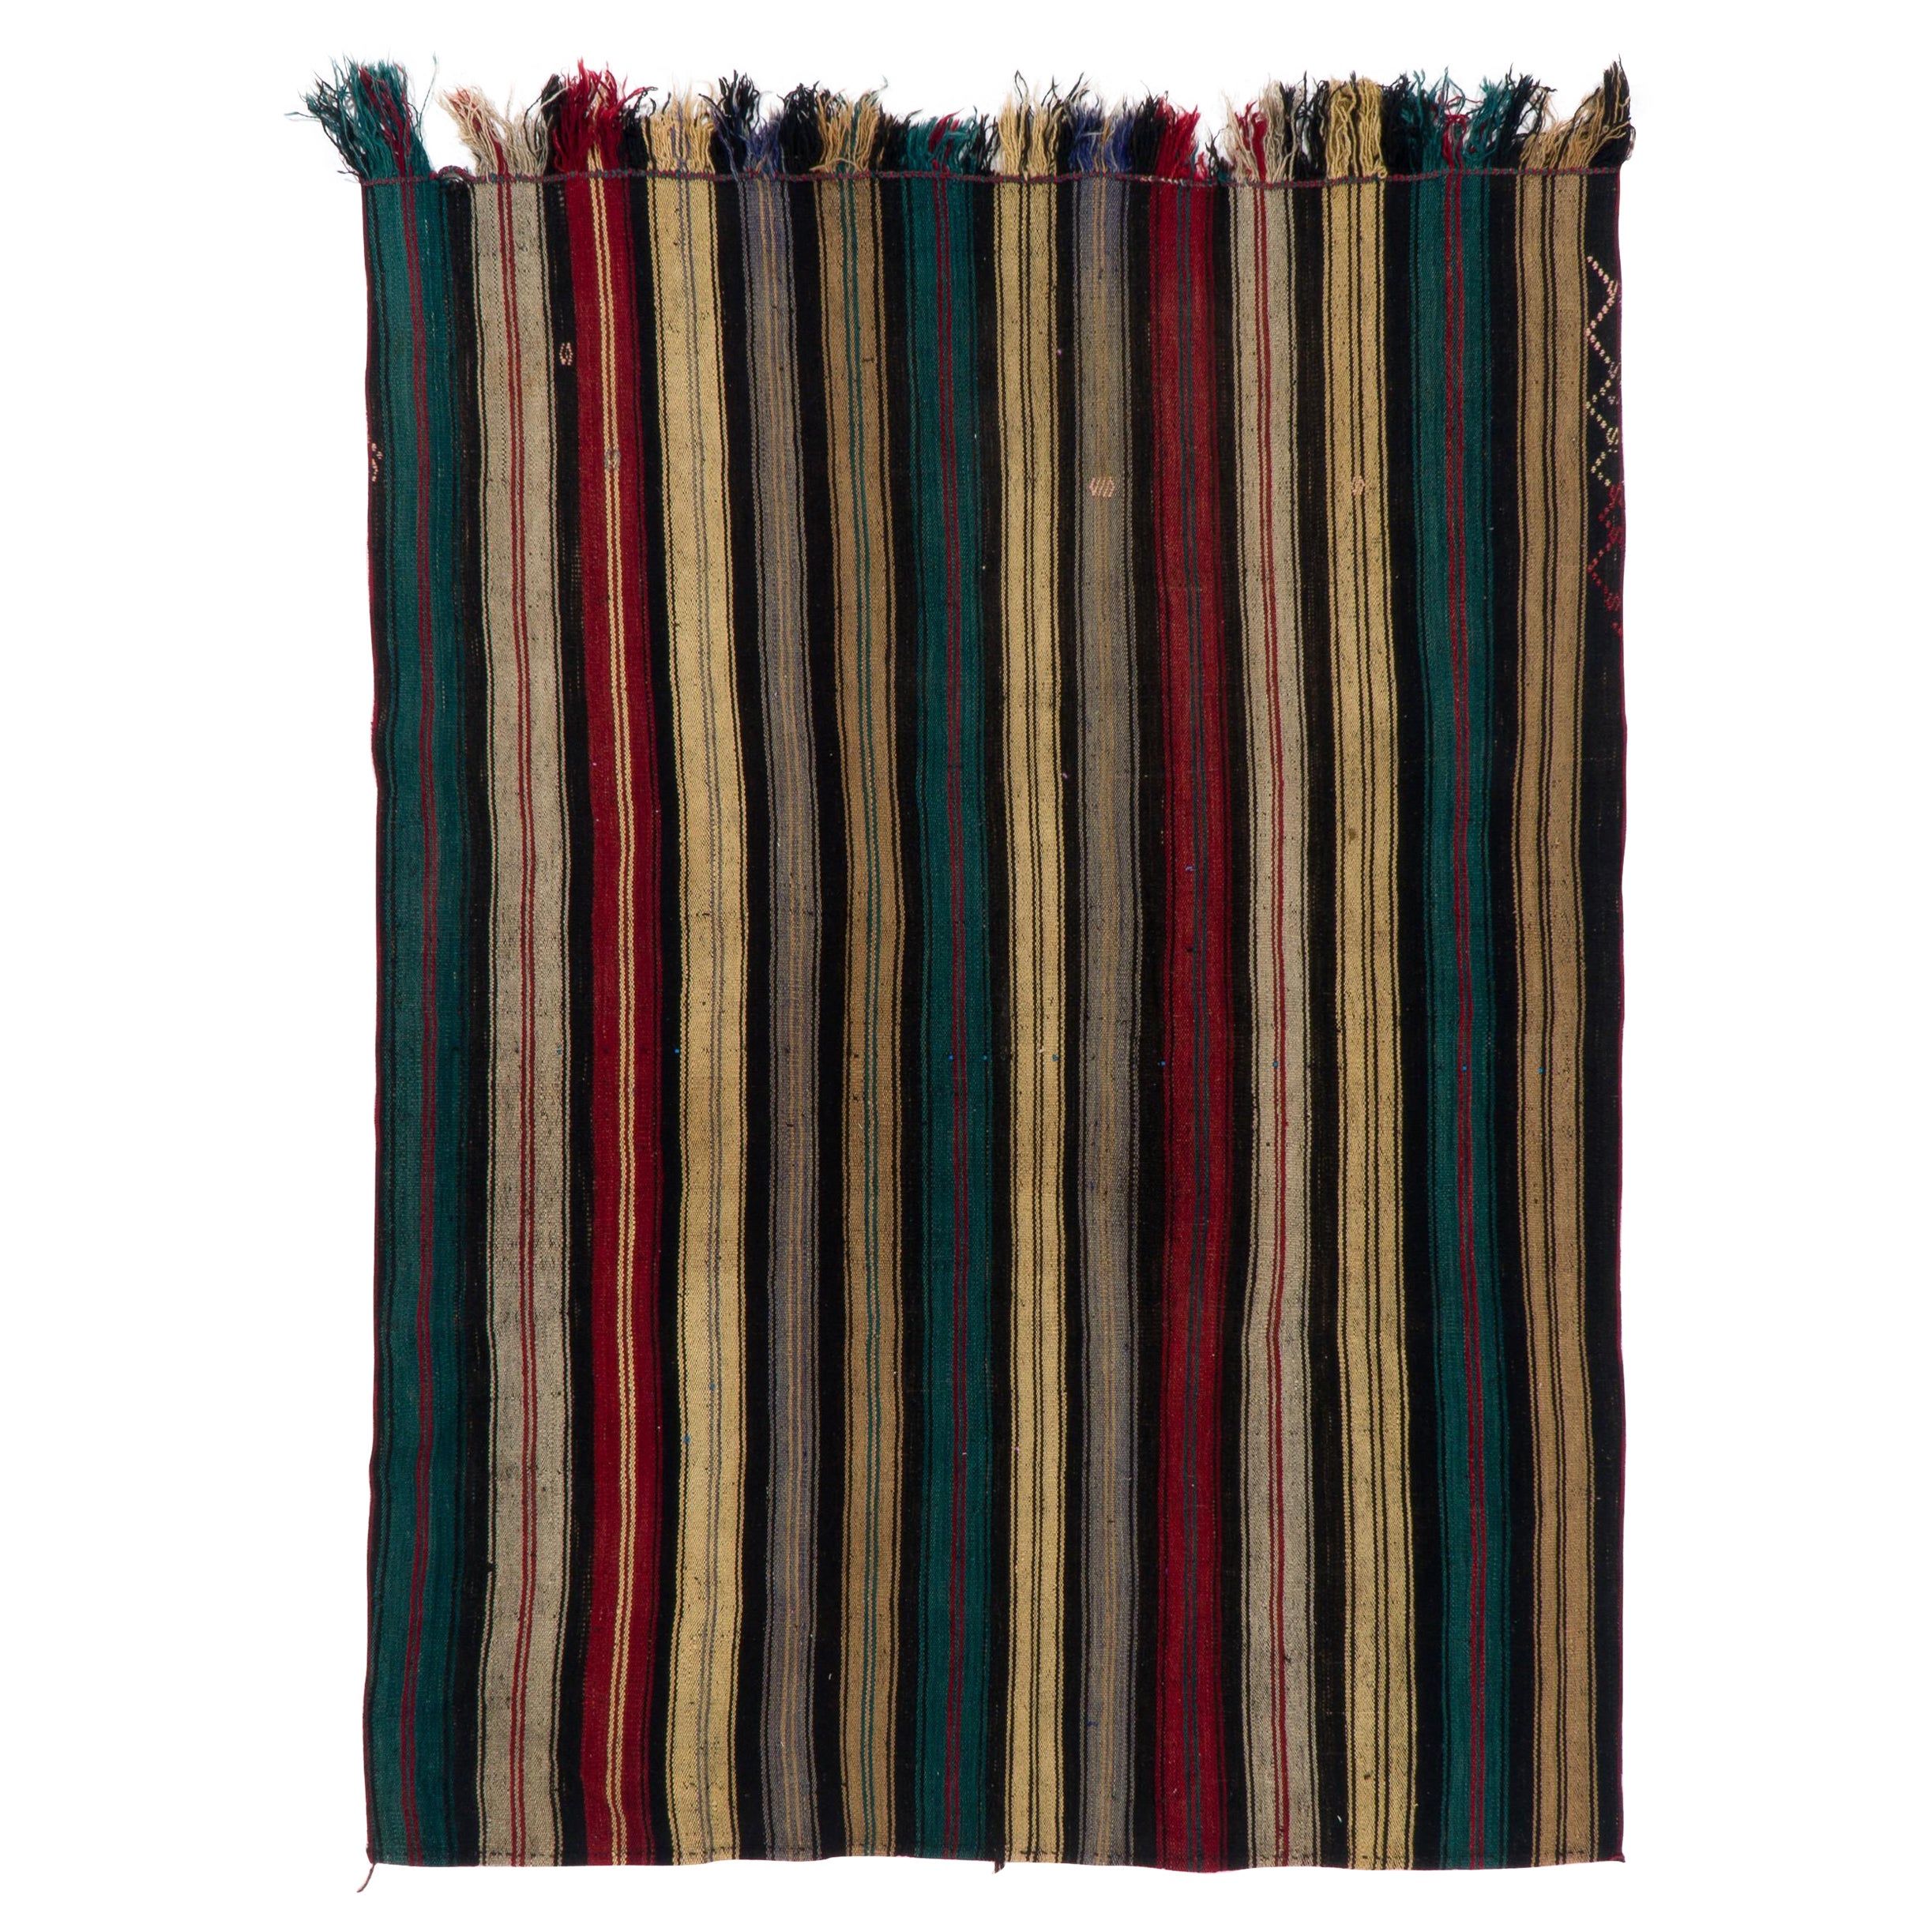 5.4x7 ft Hand-Woven Vintage Turkish Wool Kilim "Flat-weave" with Vertical Bands For Sale